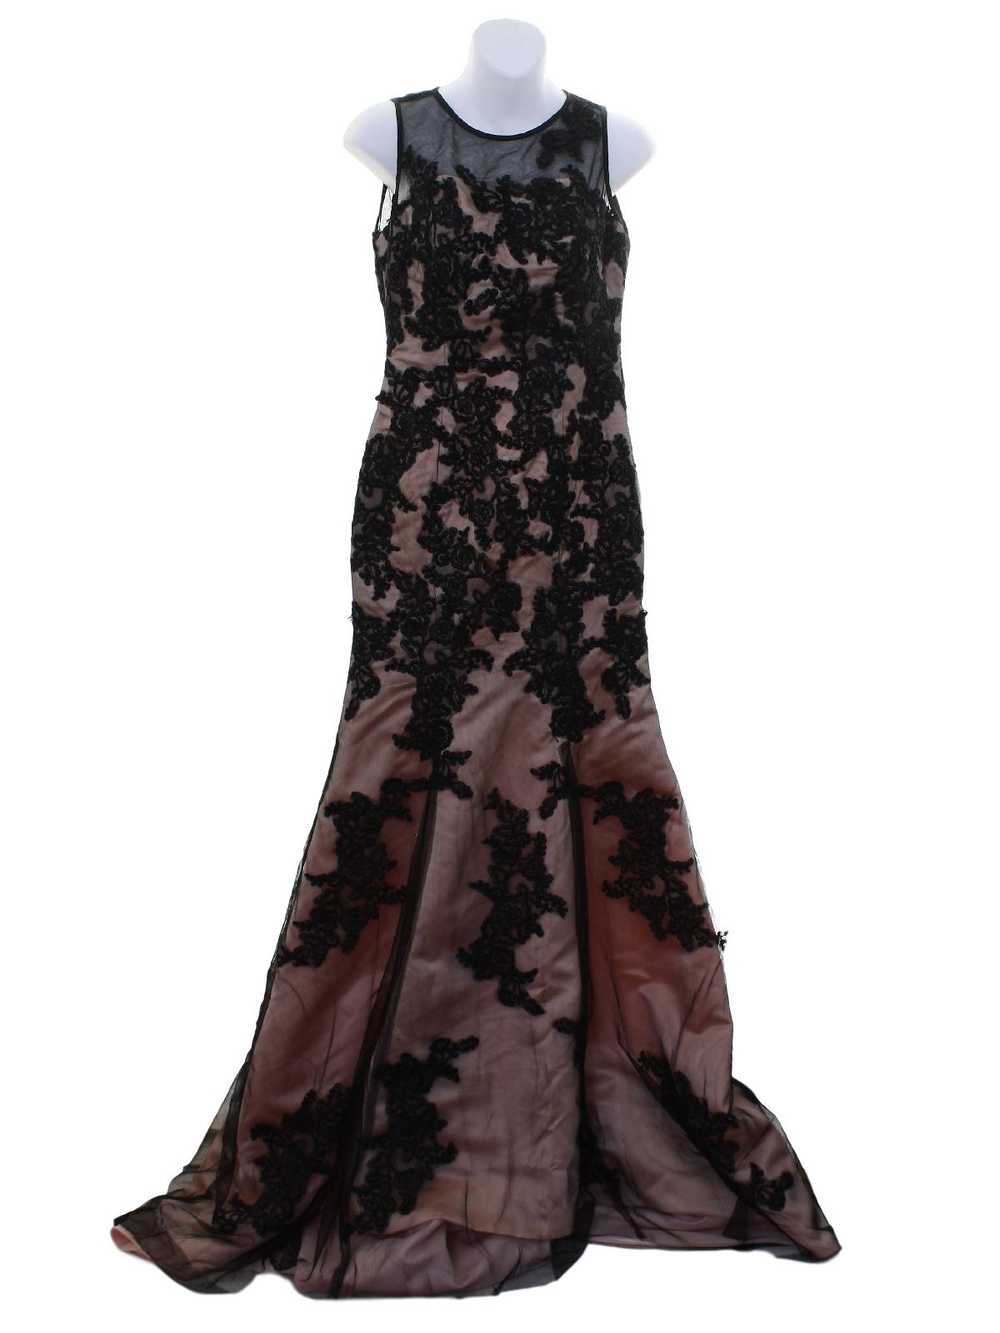 1990's Cocktail or Prom Maxi Dress - image 1